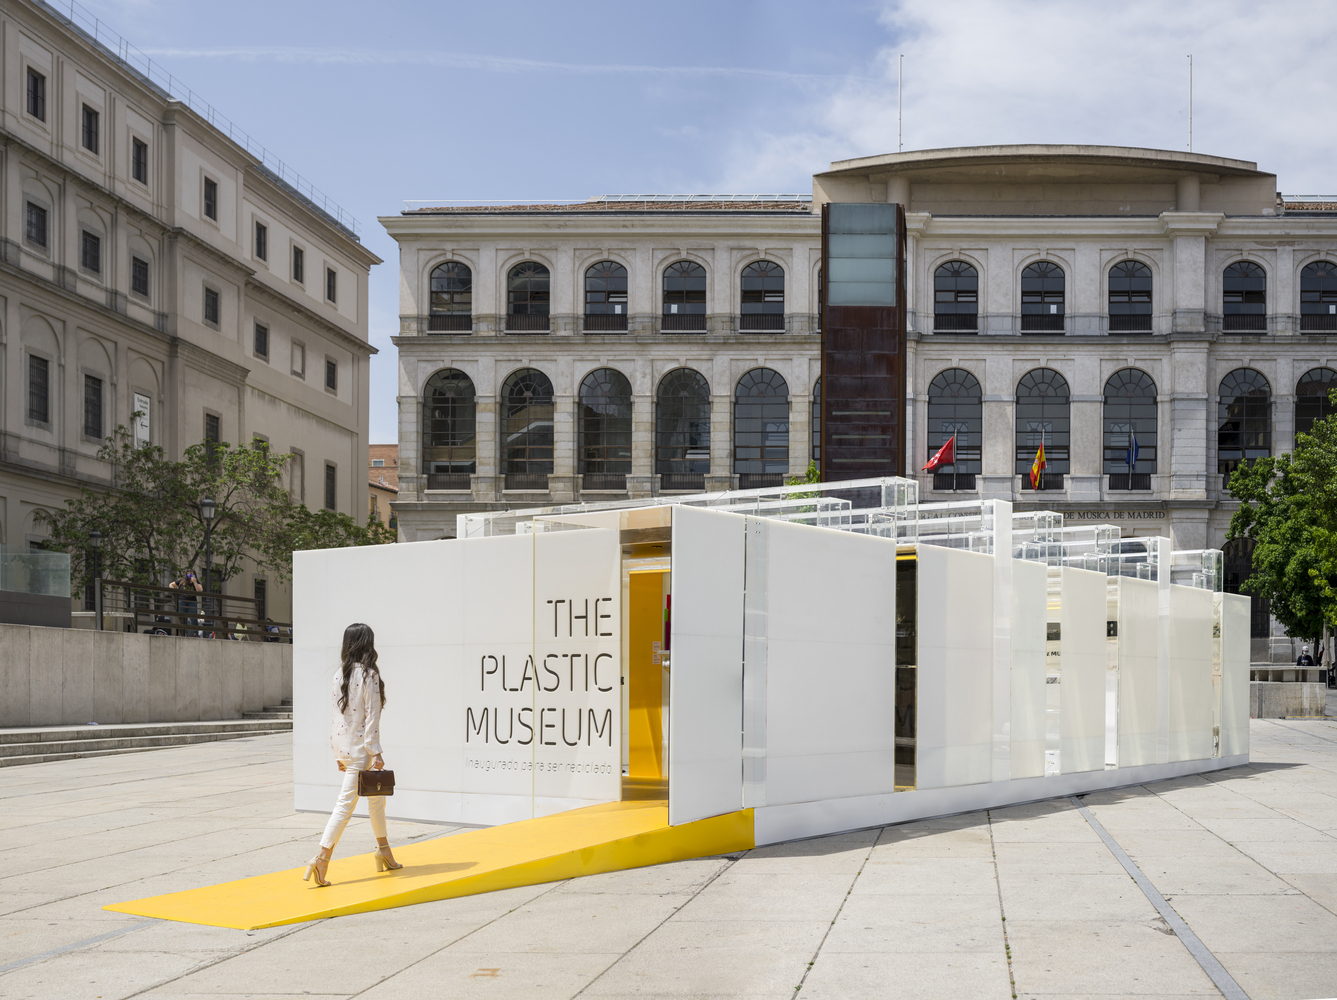 Madrid’s mayor inaugurates the world’s first 100% recyclable Museum